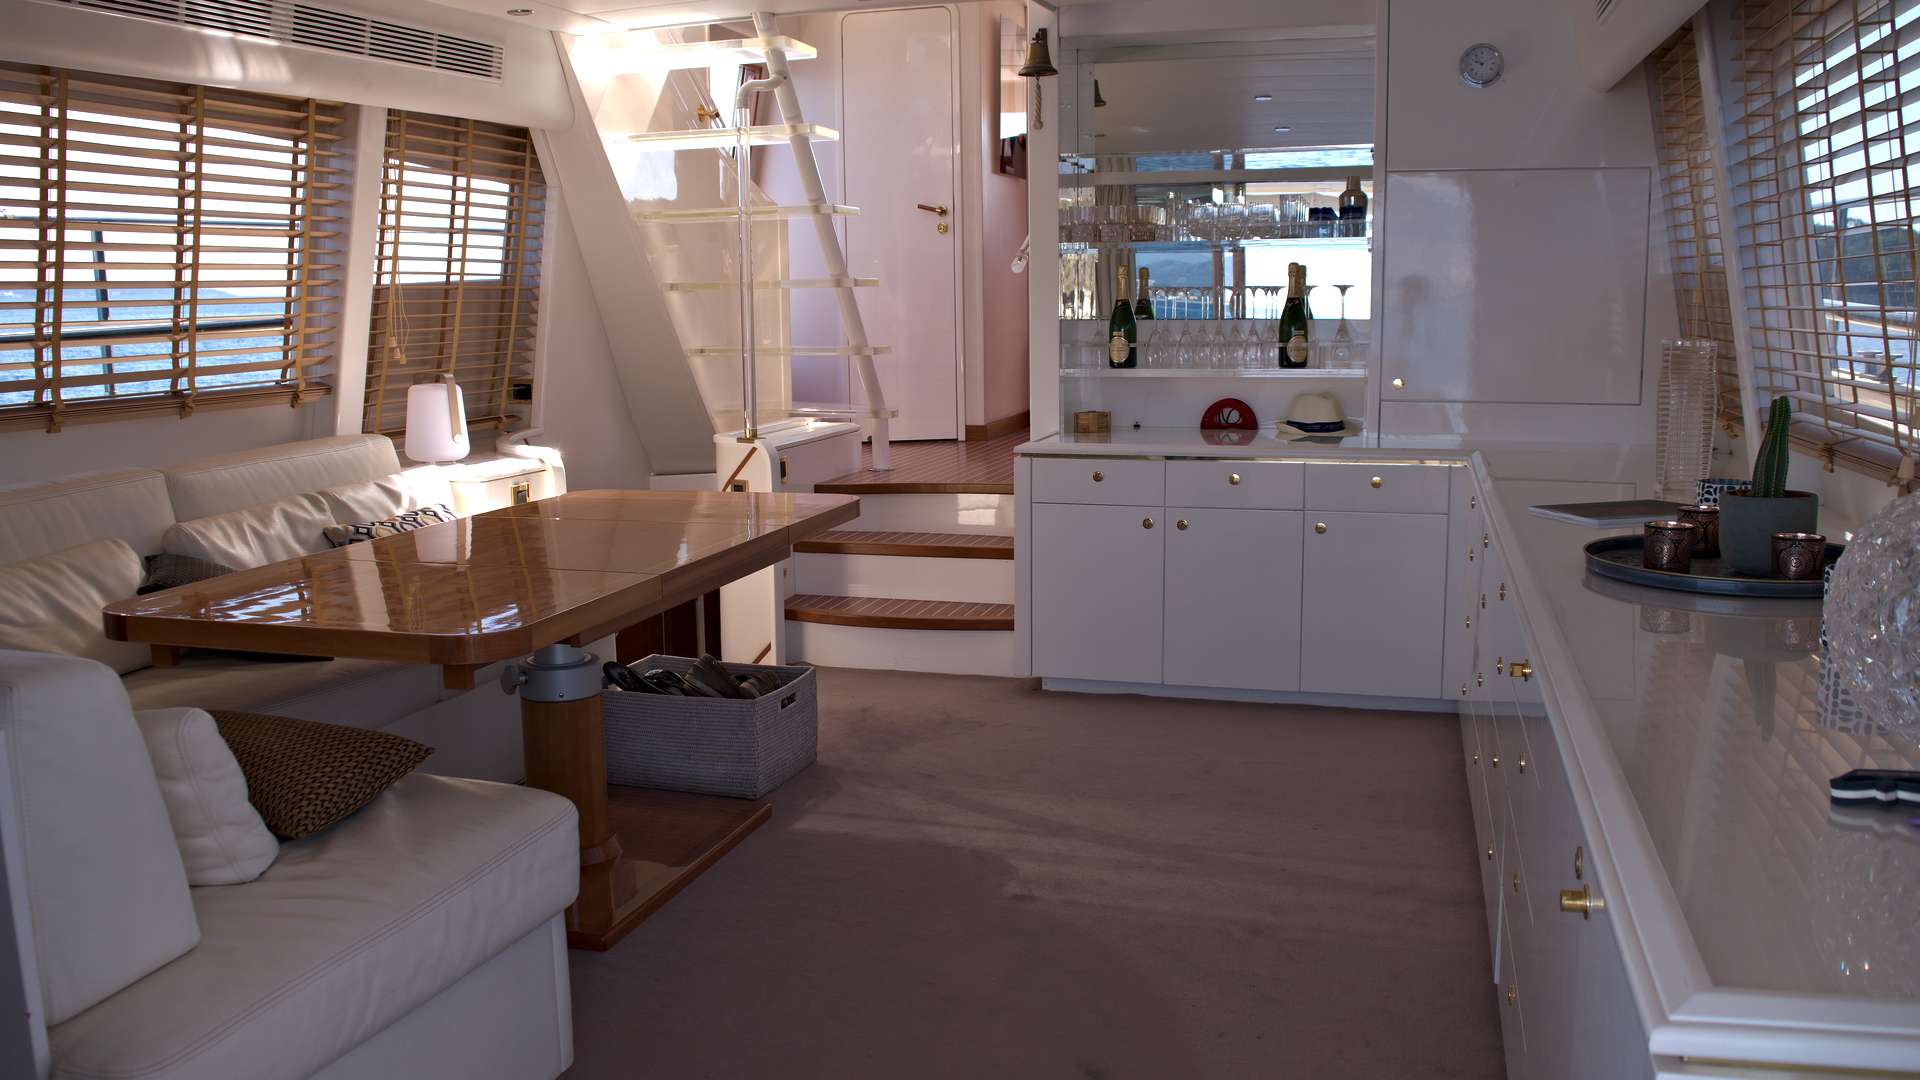 Joia V - Yacht Charter Cannes & Boat hire in Fr. Riviera, Corsica & Sardinia 2